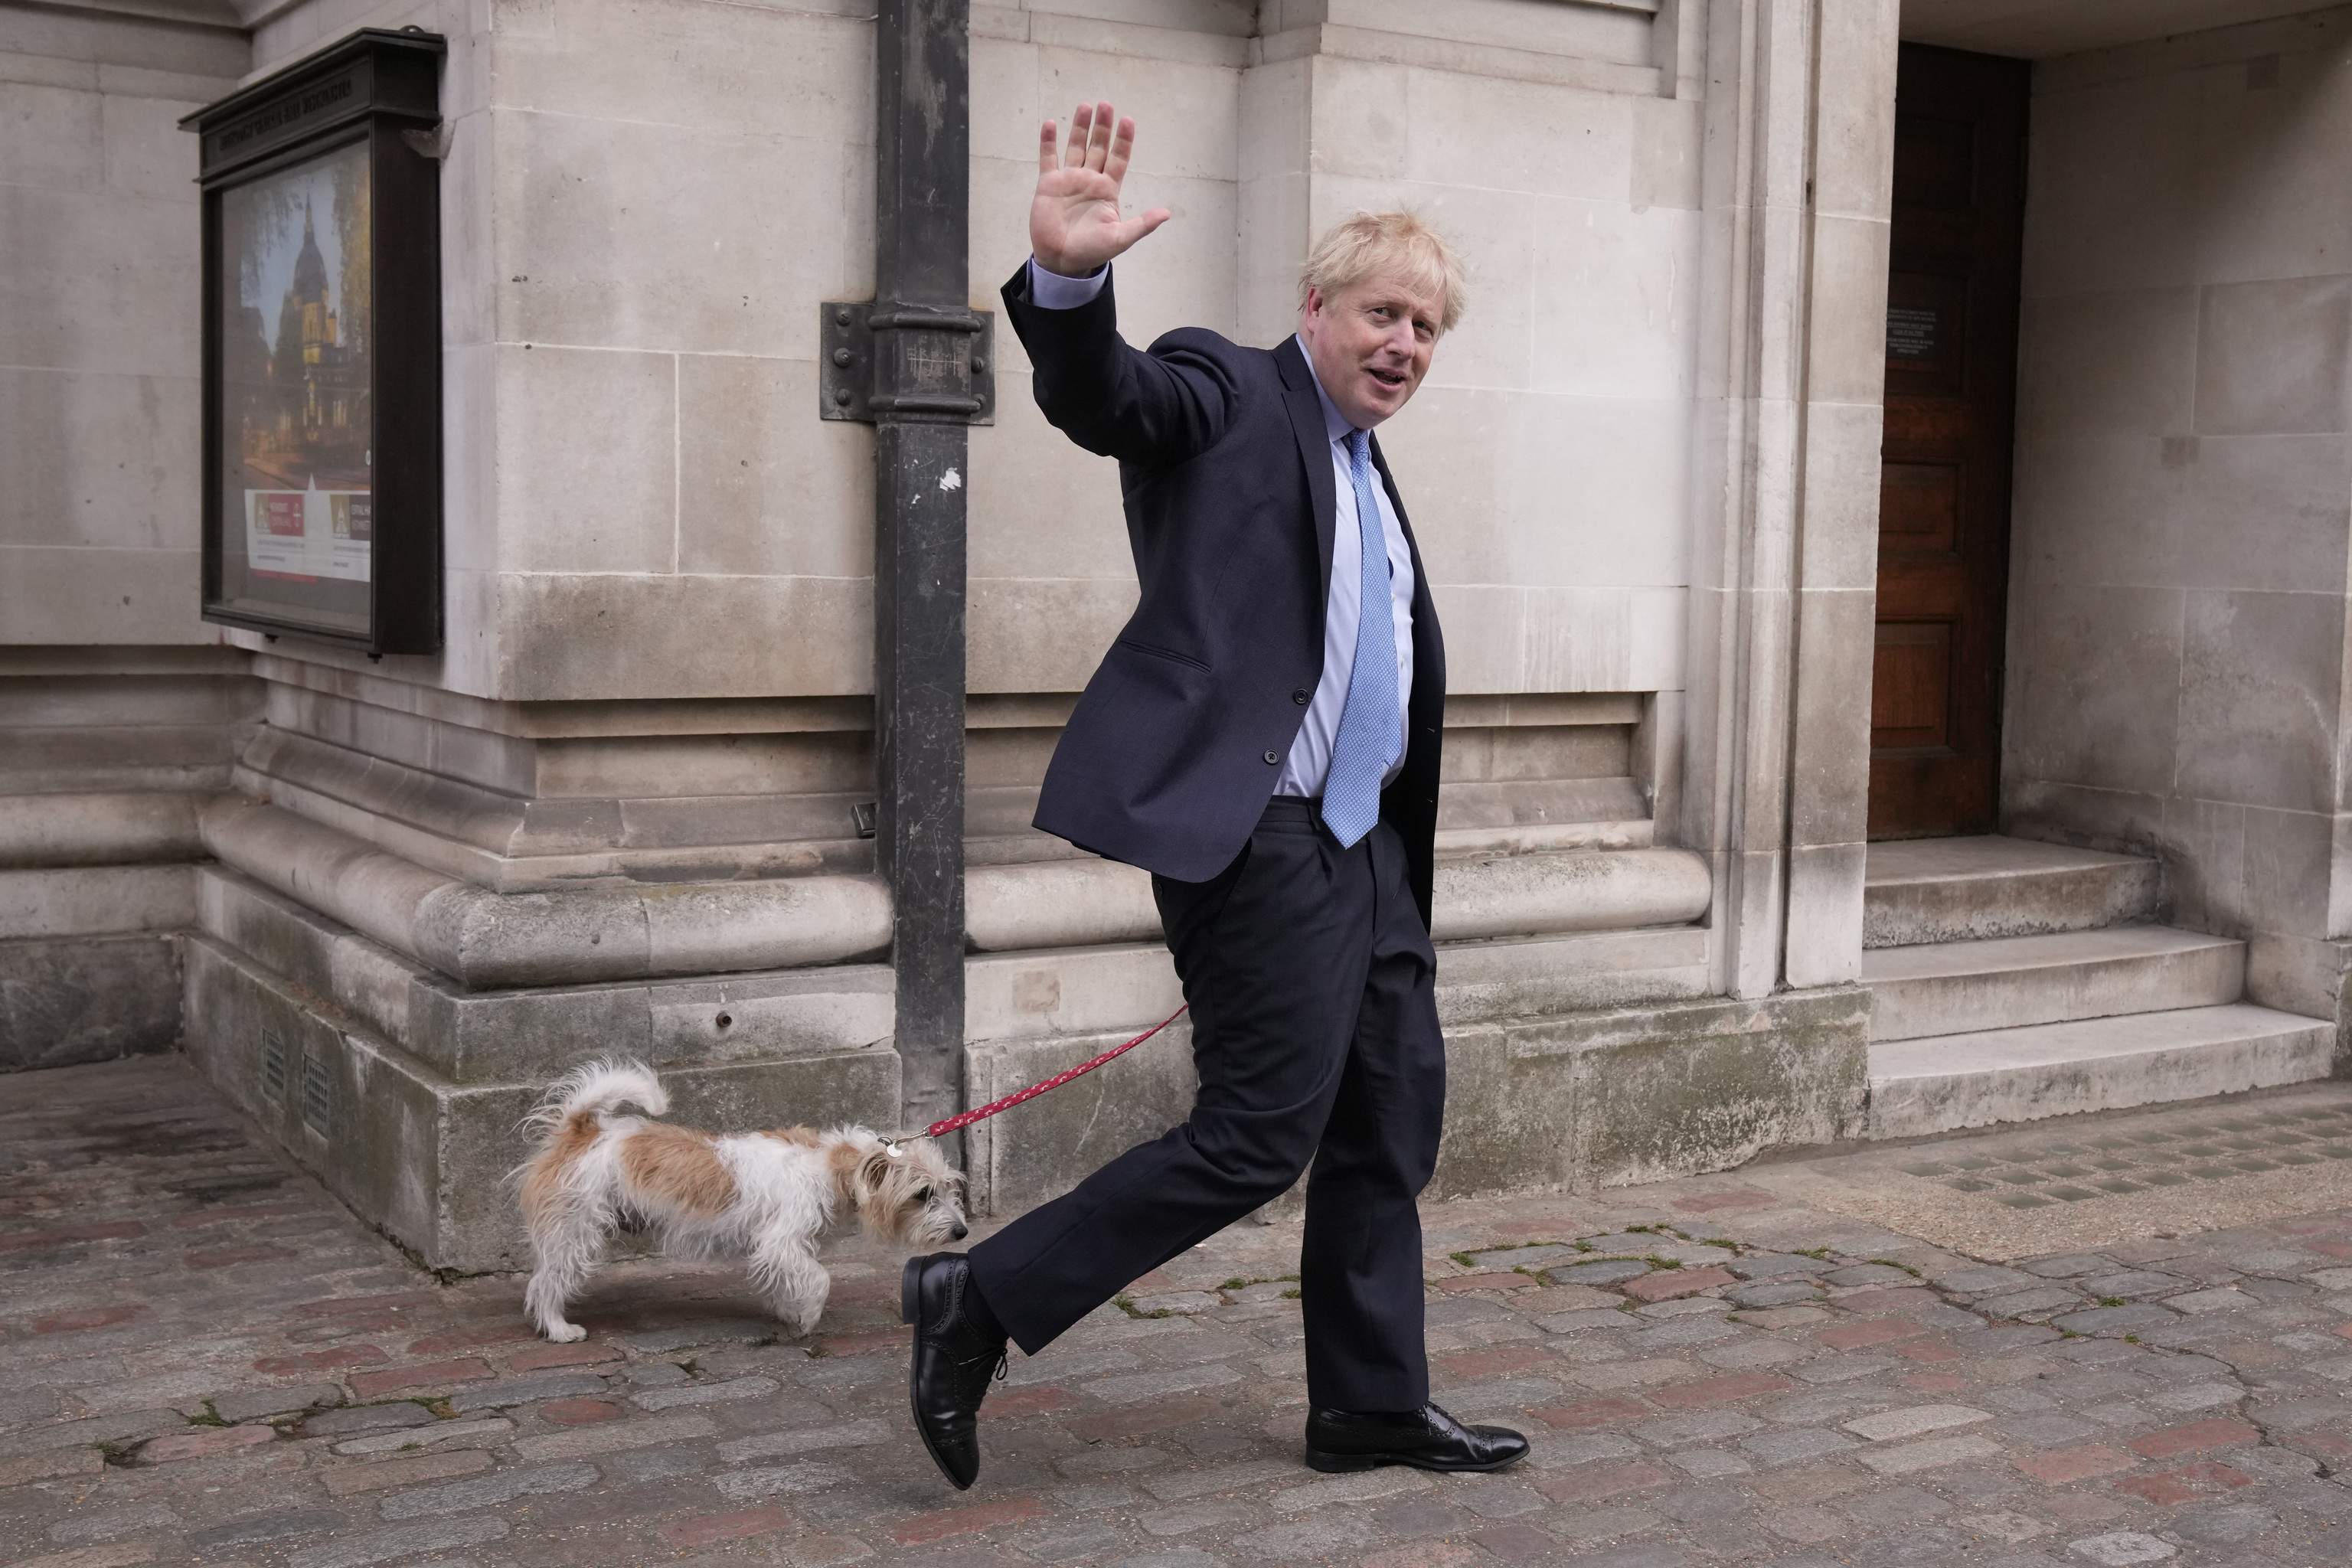 'Premier' Boris Johnson greets the press in London yesterday after the vote.